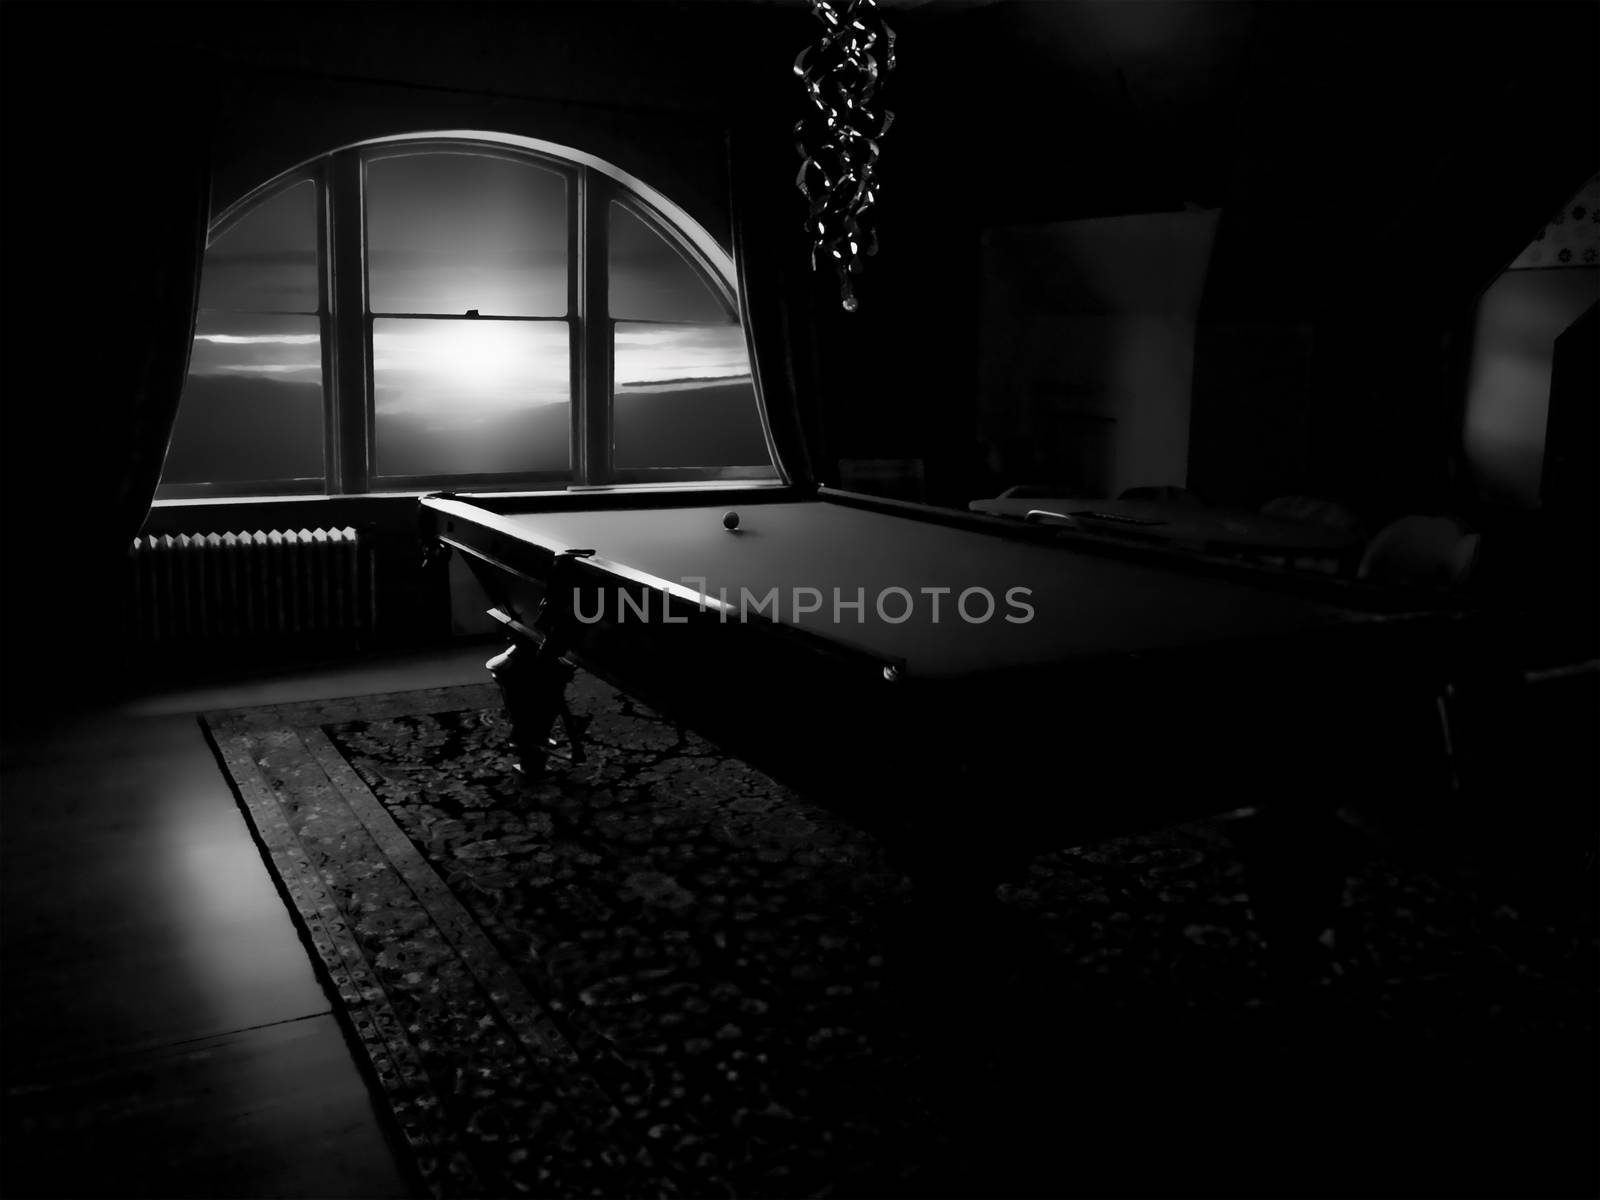 billiard room in an old mansion in black and white